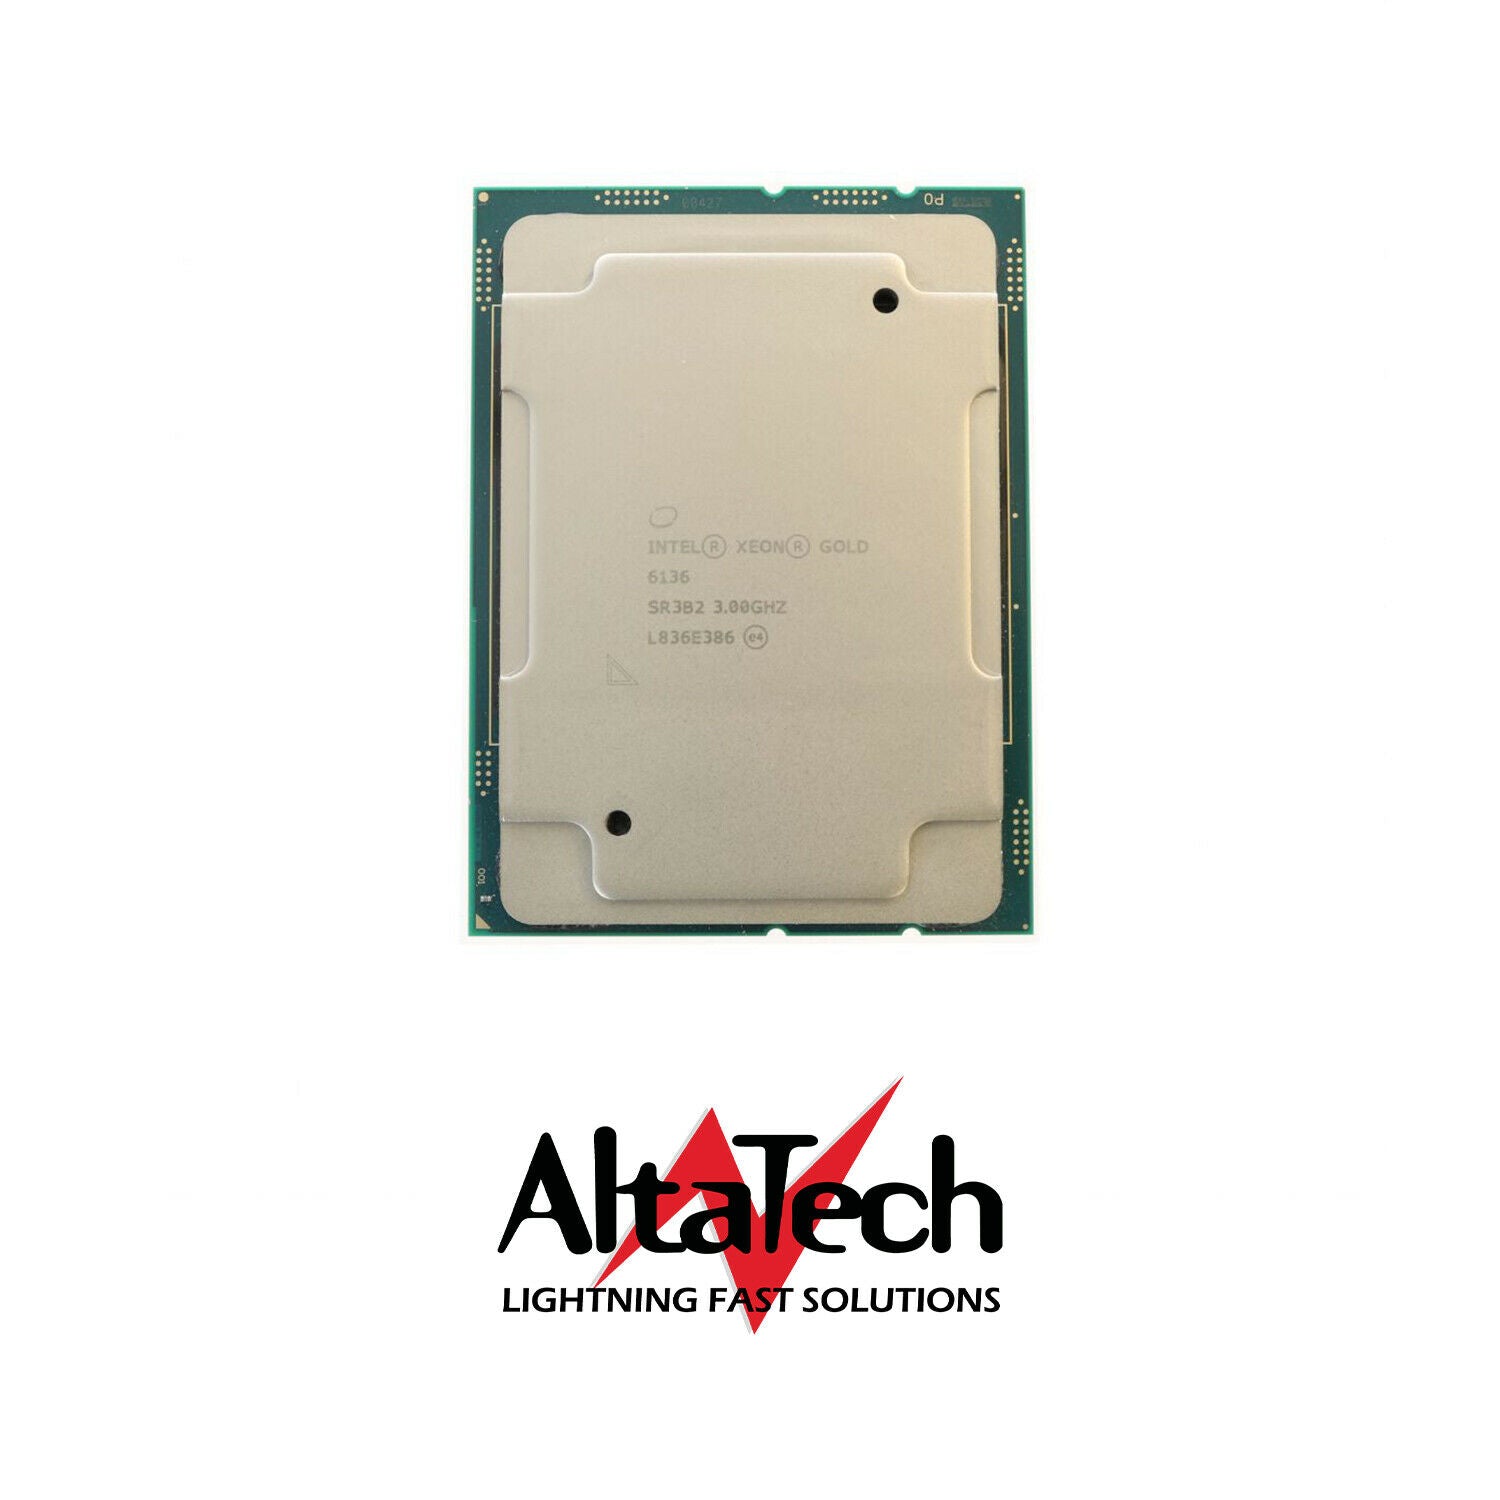 Intel CD8067303405800 Intel Xeon Gold 6136 3.0GHz 24.75MB 12-Core 150W AU Processor w/ Thermal Grease, Used